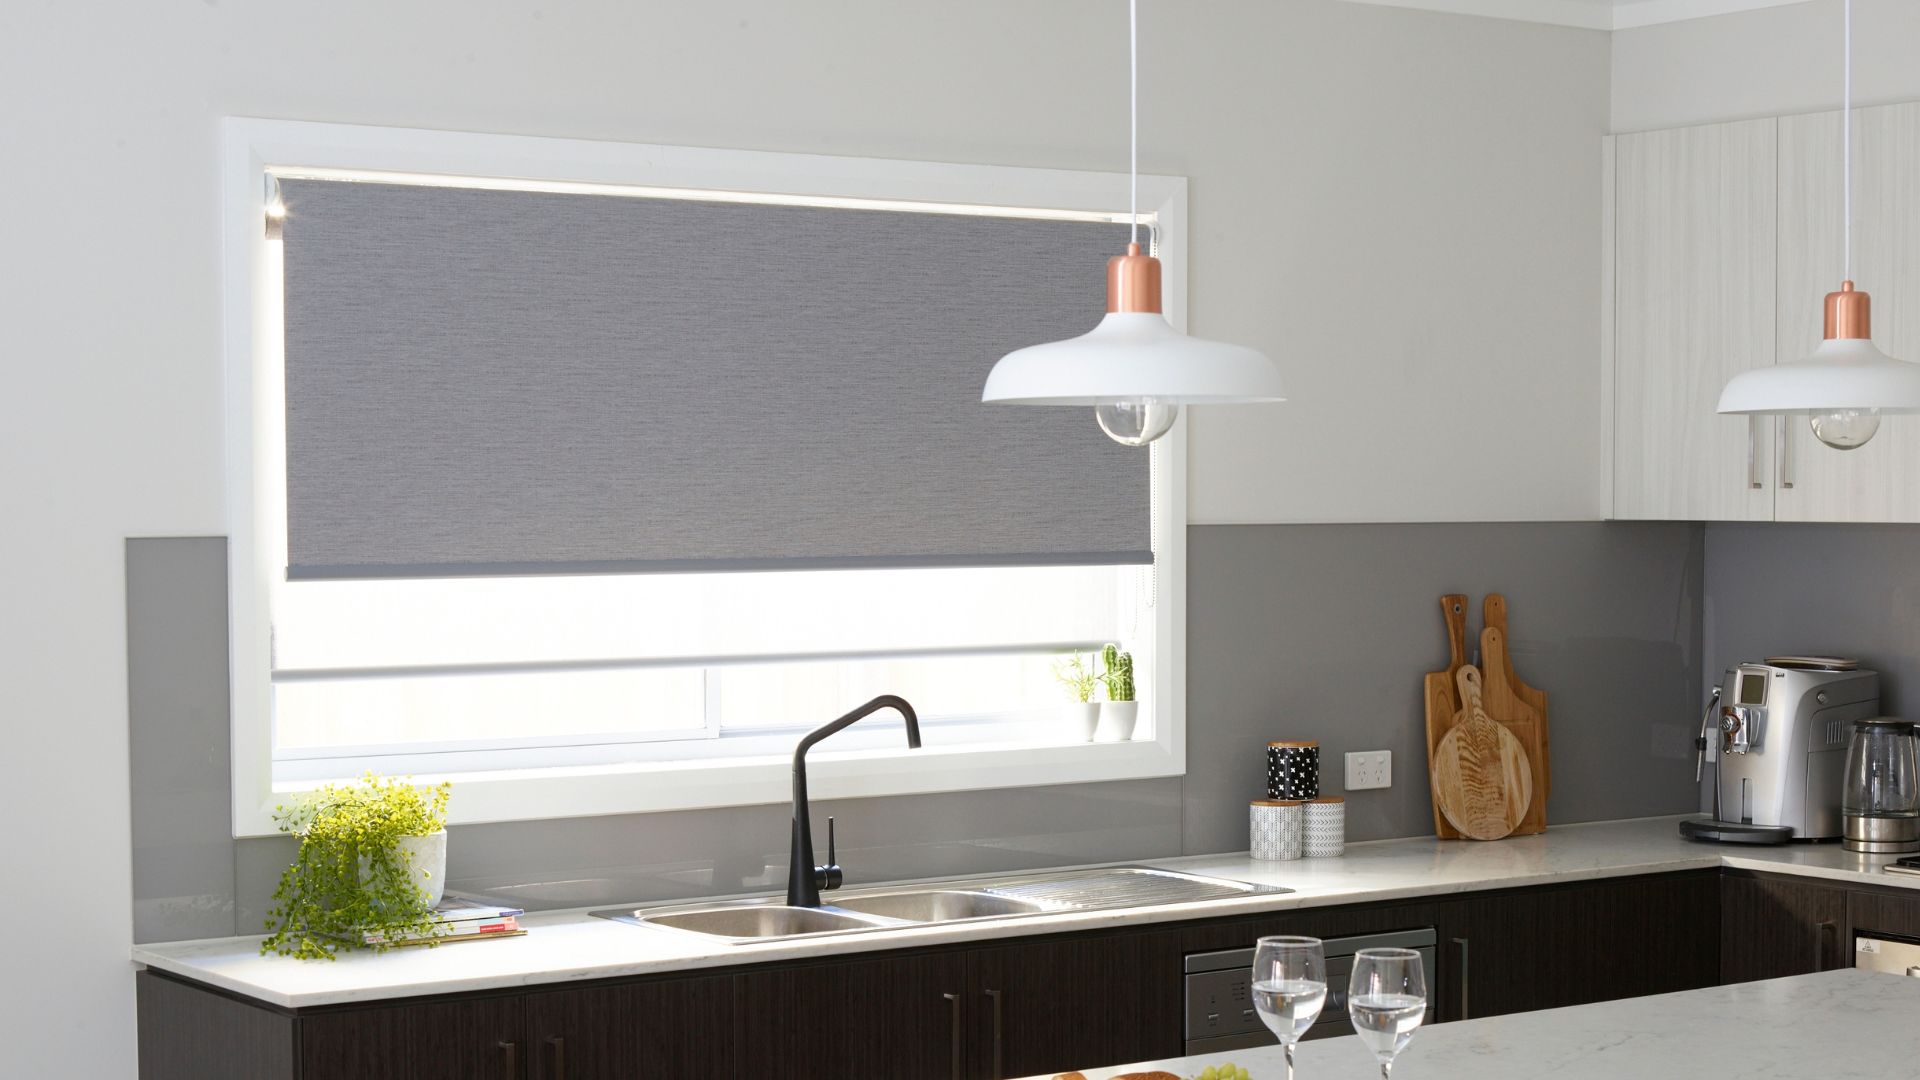 Sheet white layered with grey roller blinds in the kitchen